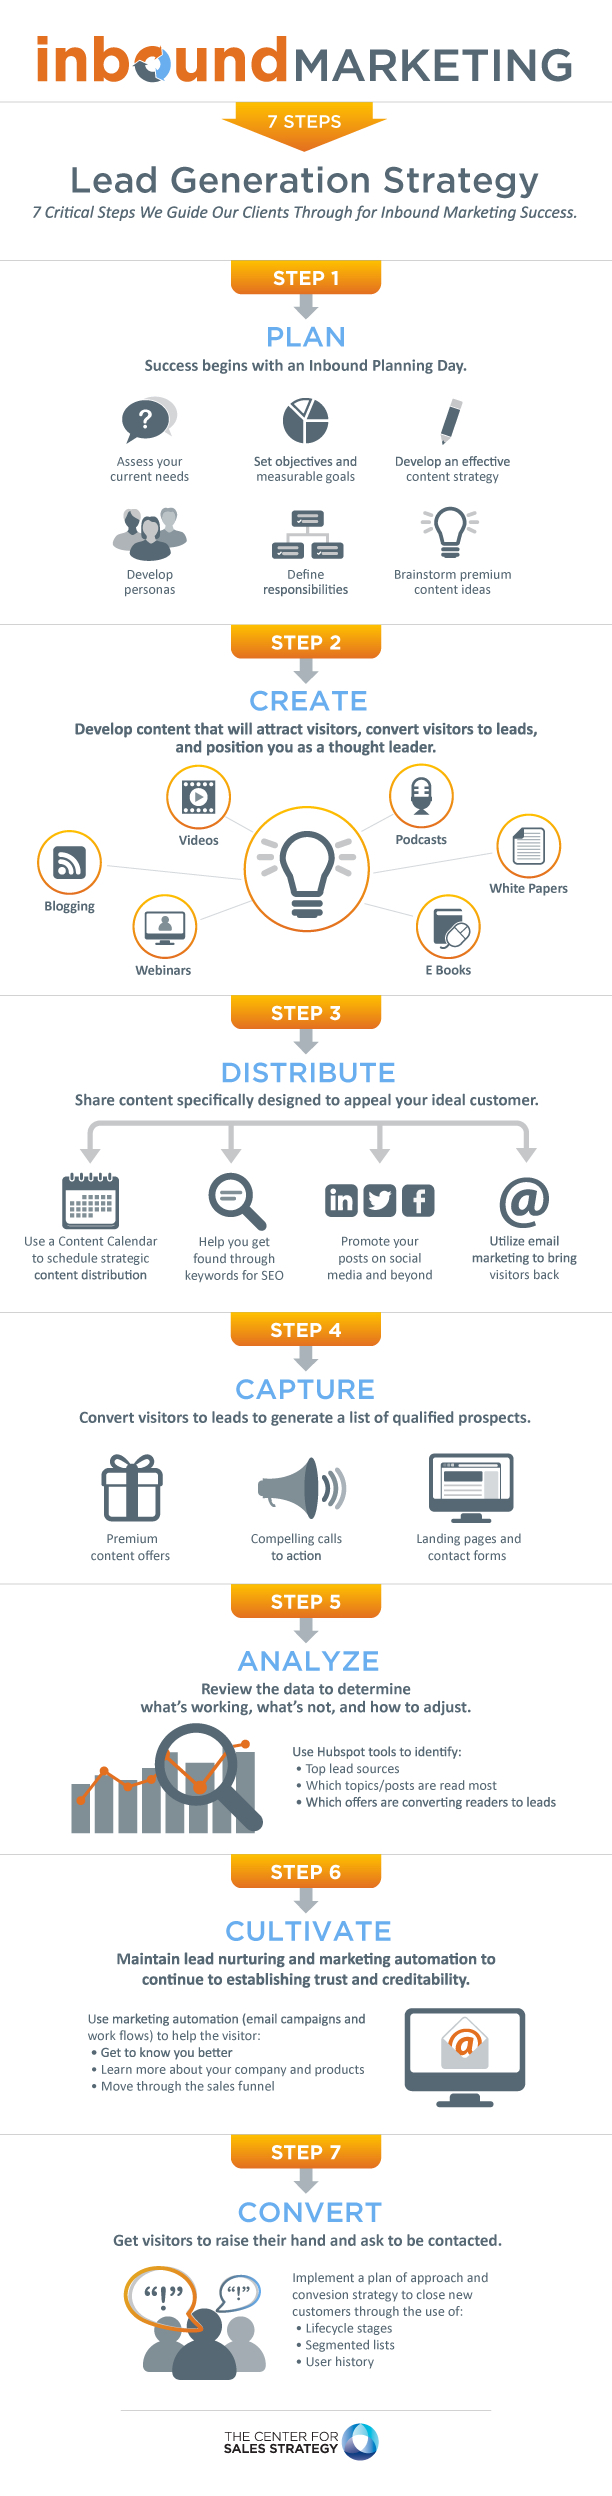 7 steps to an inbound marketing lead gen strategy infographic